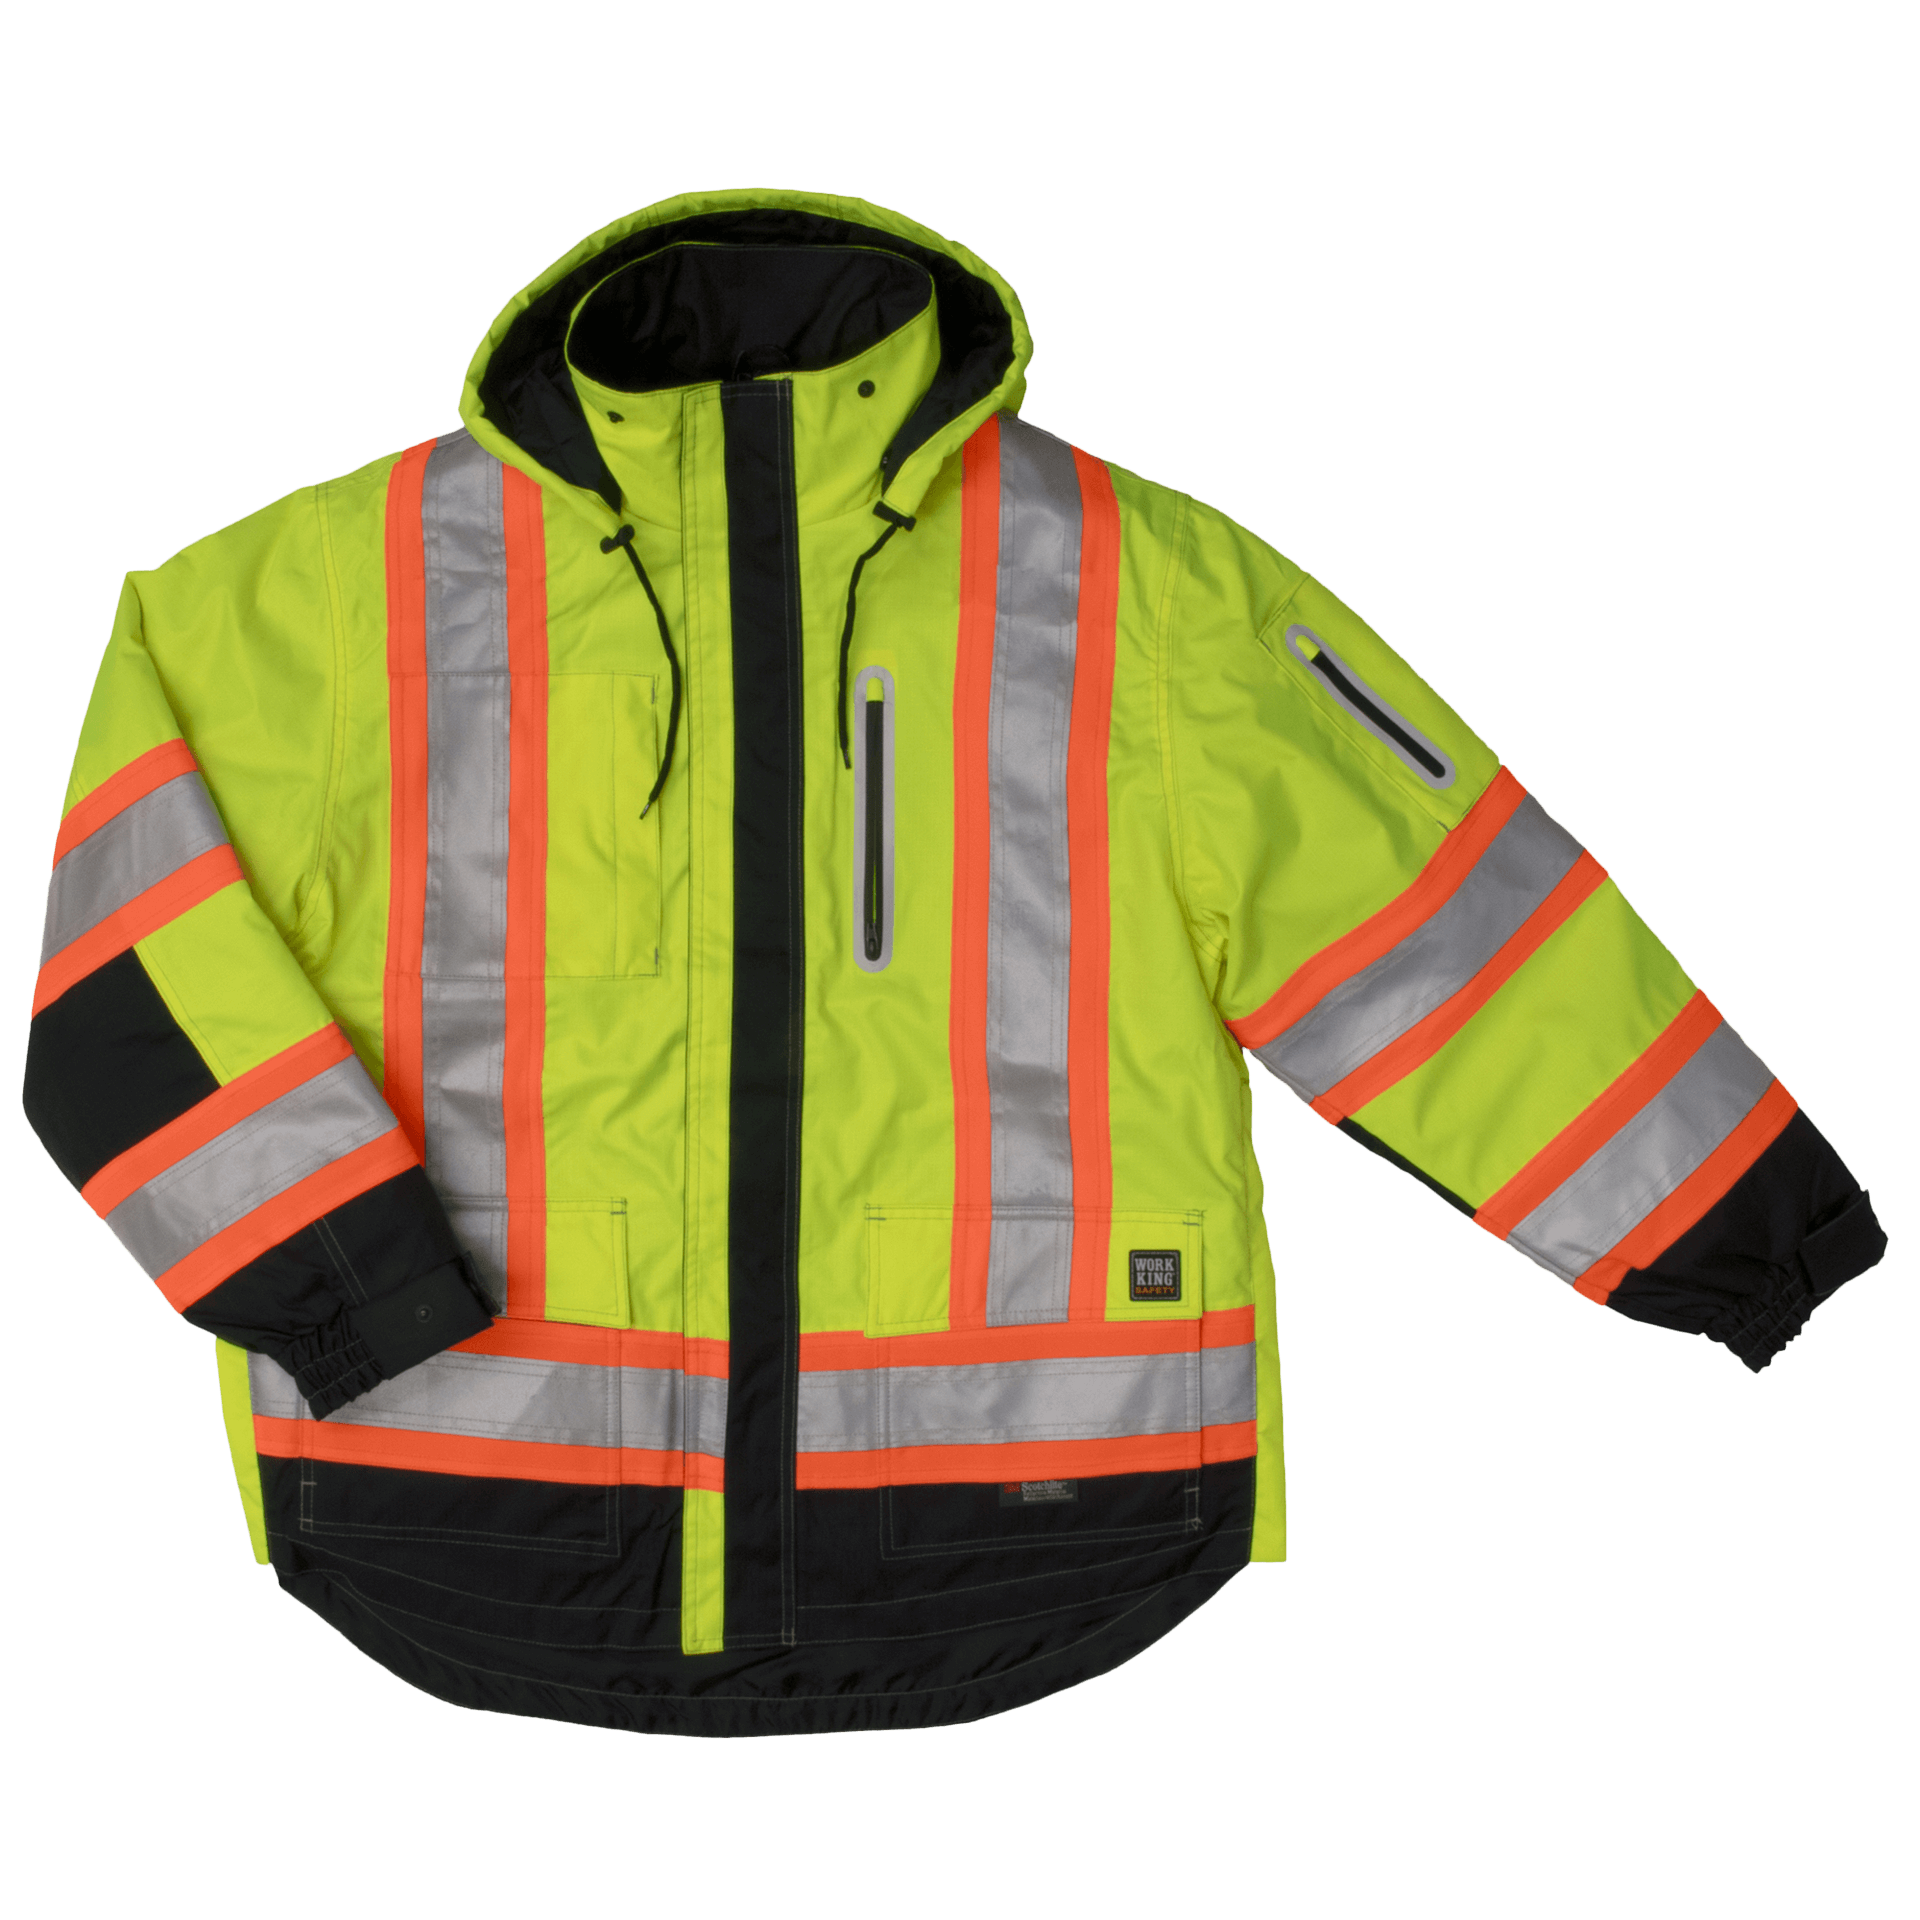 Tough Duck 4-in-1 Safety Jacket - S187 - Fluorescent Green